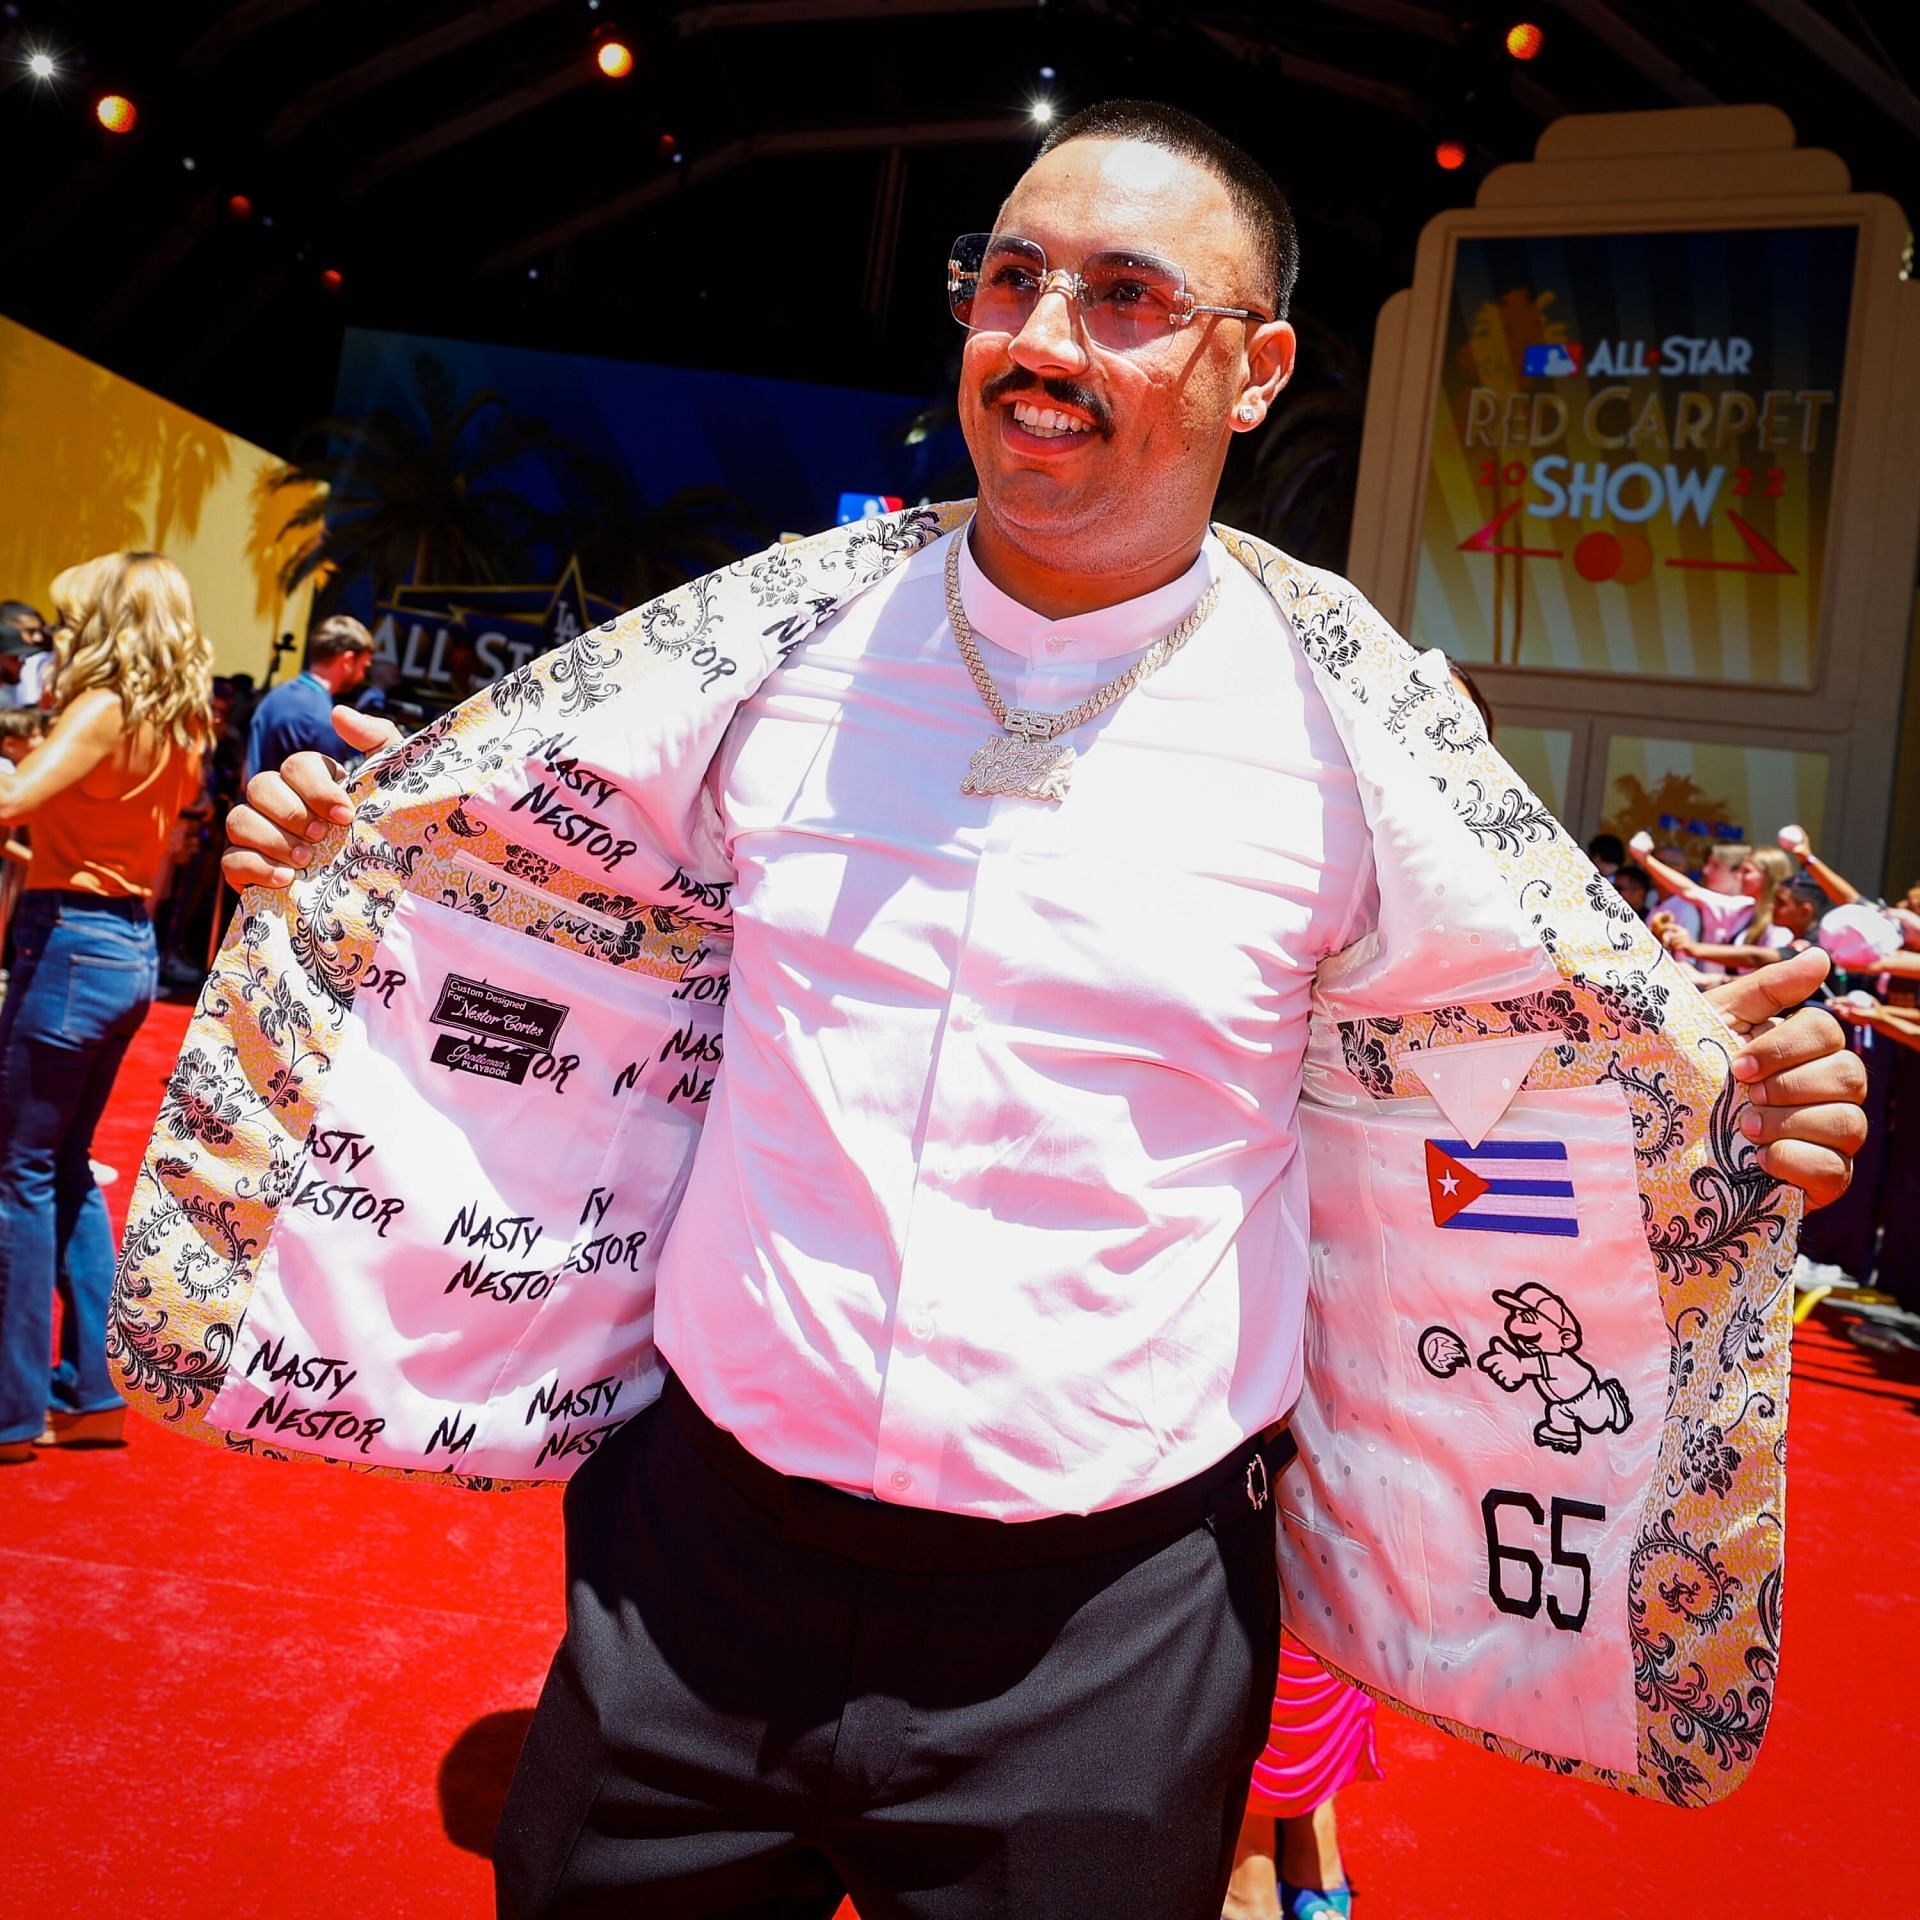 New York Yankees starting pitcher Nestor Cortes during the 2022 All-Star Game Red Carpet Show.